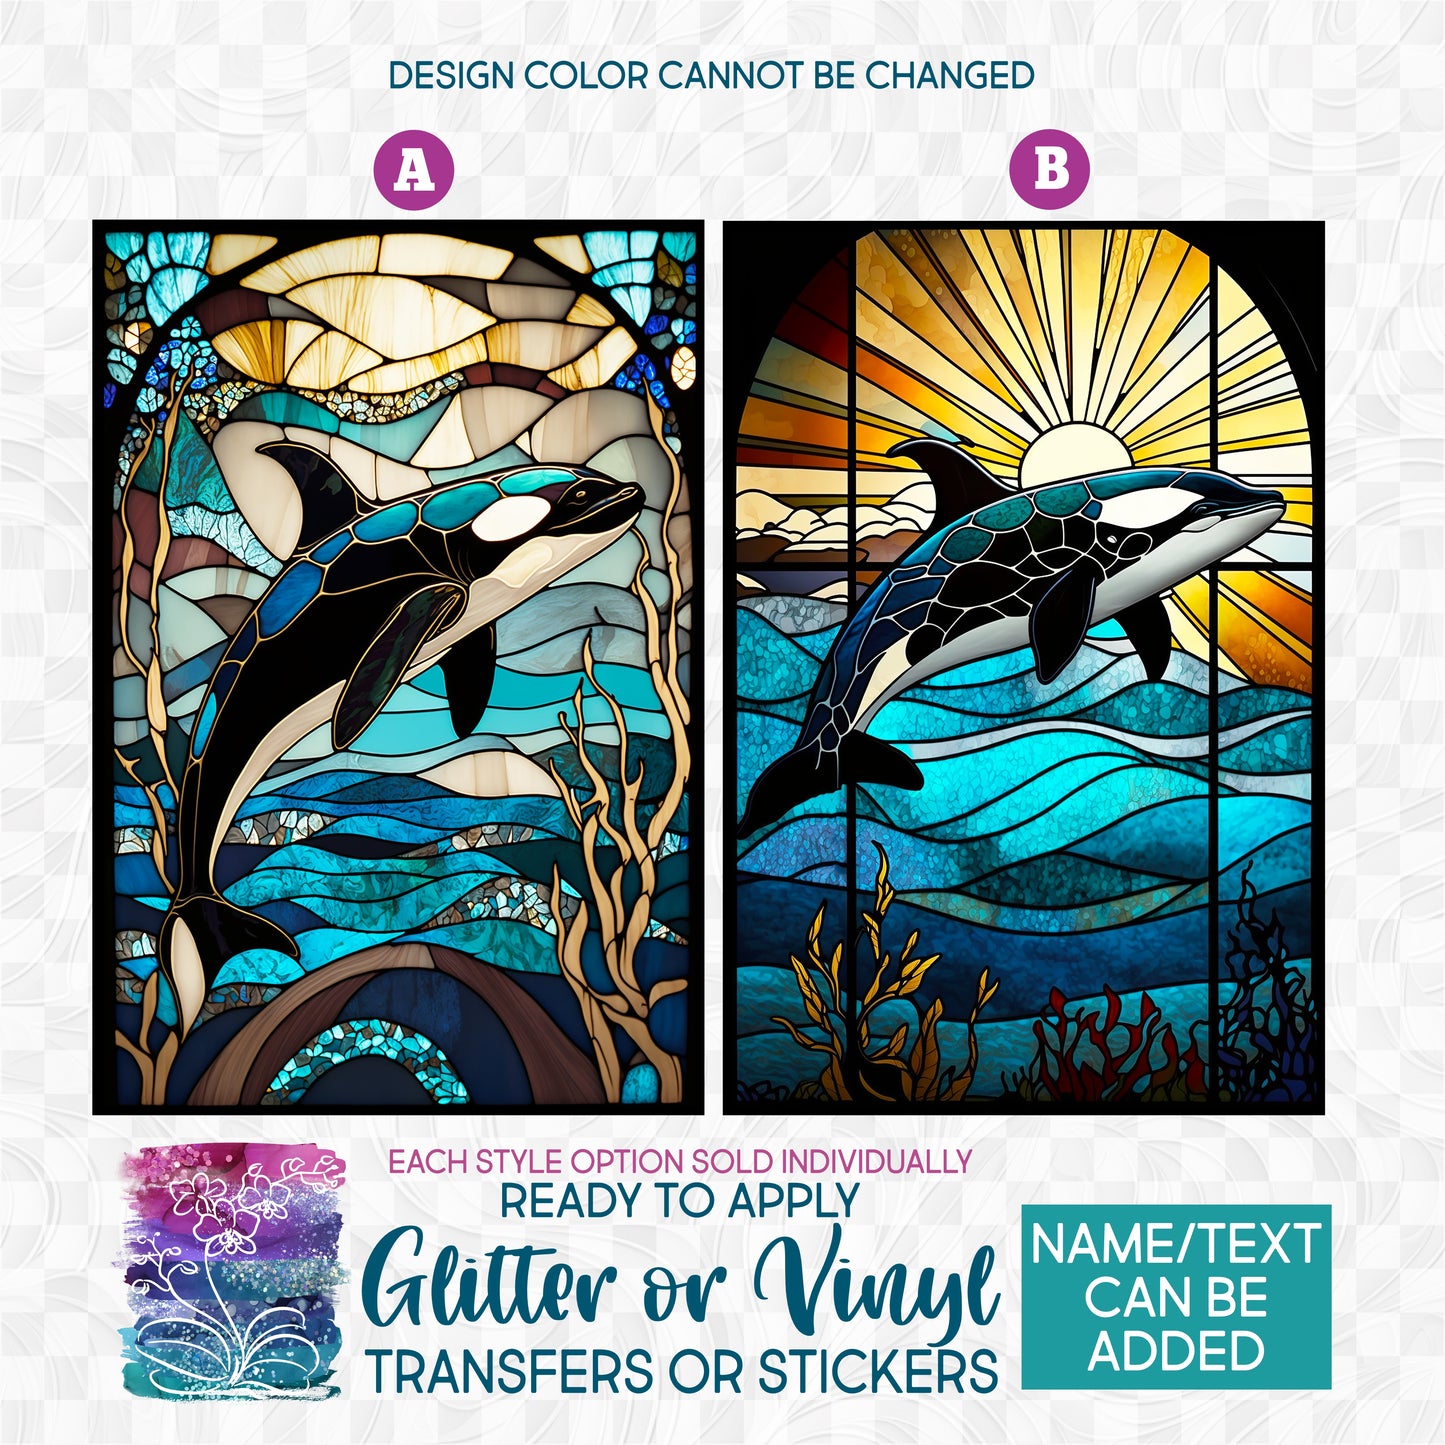 (s150-23) Stained-Glass Orca Killer Whale Glitter or Vinyl Iron-On Transfer or Sticker